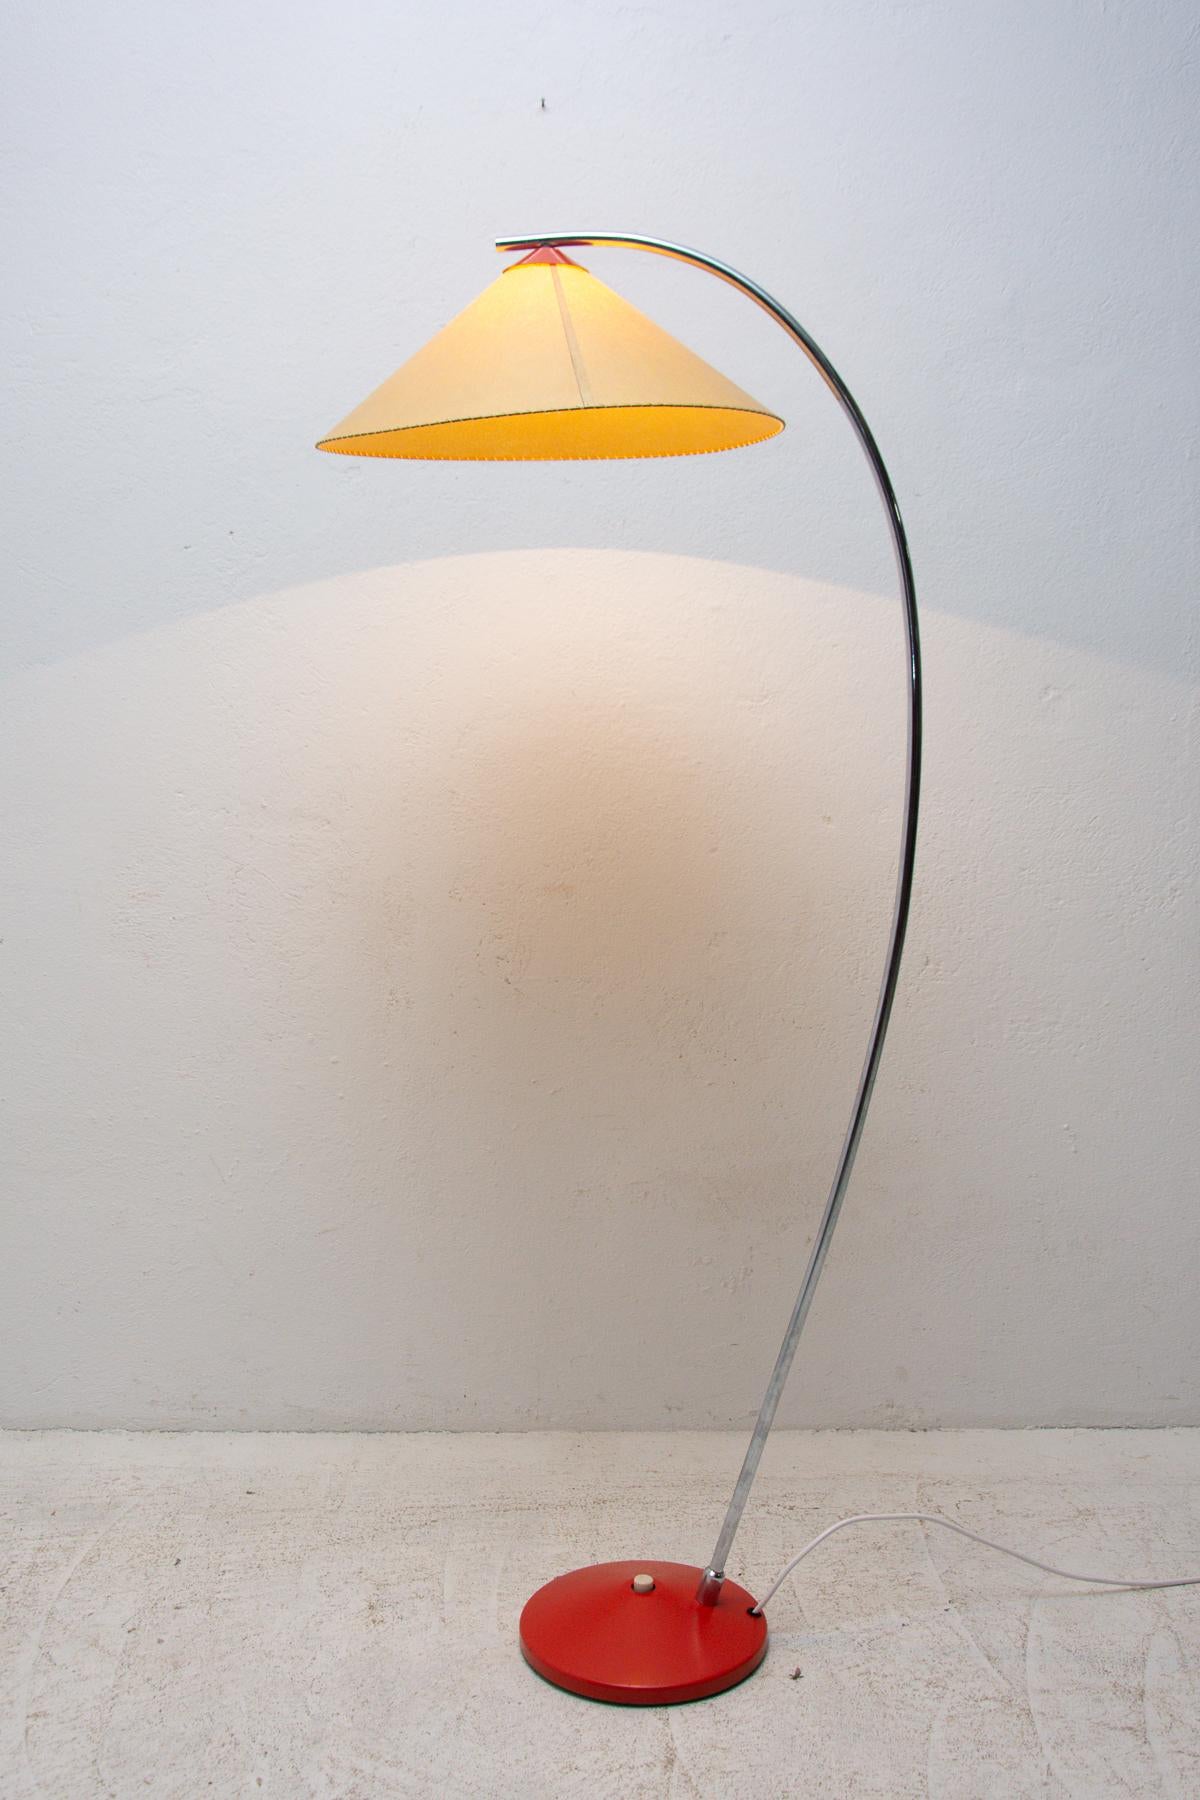 This floor lamp was made by Zukov in the former Czechoslovakia in the 1950s.
It is a typical example of Czechoslovak design lighting from the middle of the century associated with the “Brussels period” and the world-famous EXPO58. Chrome-plated